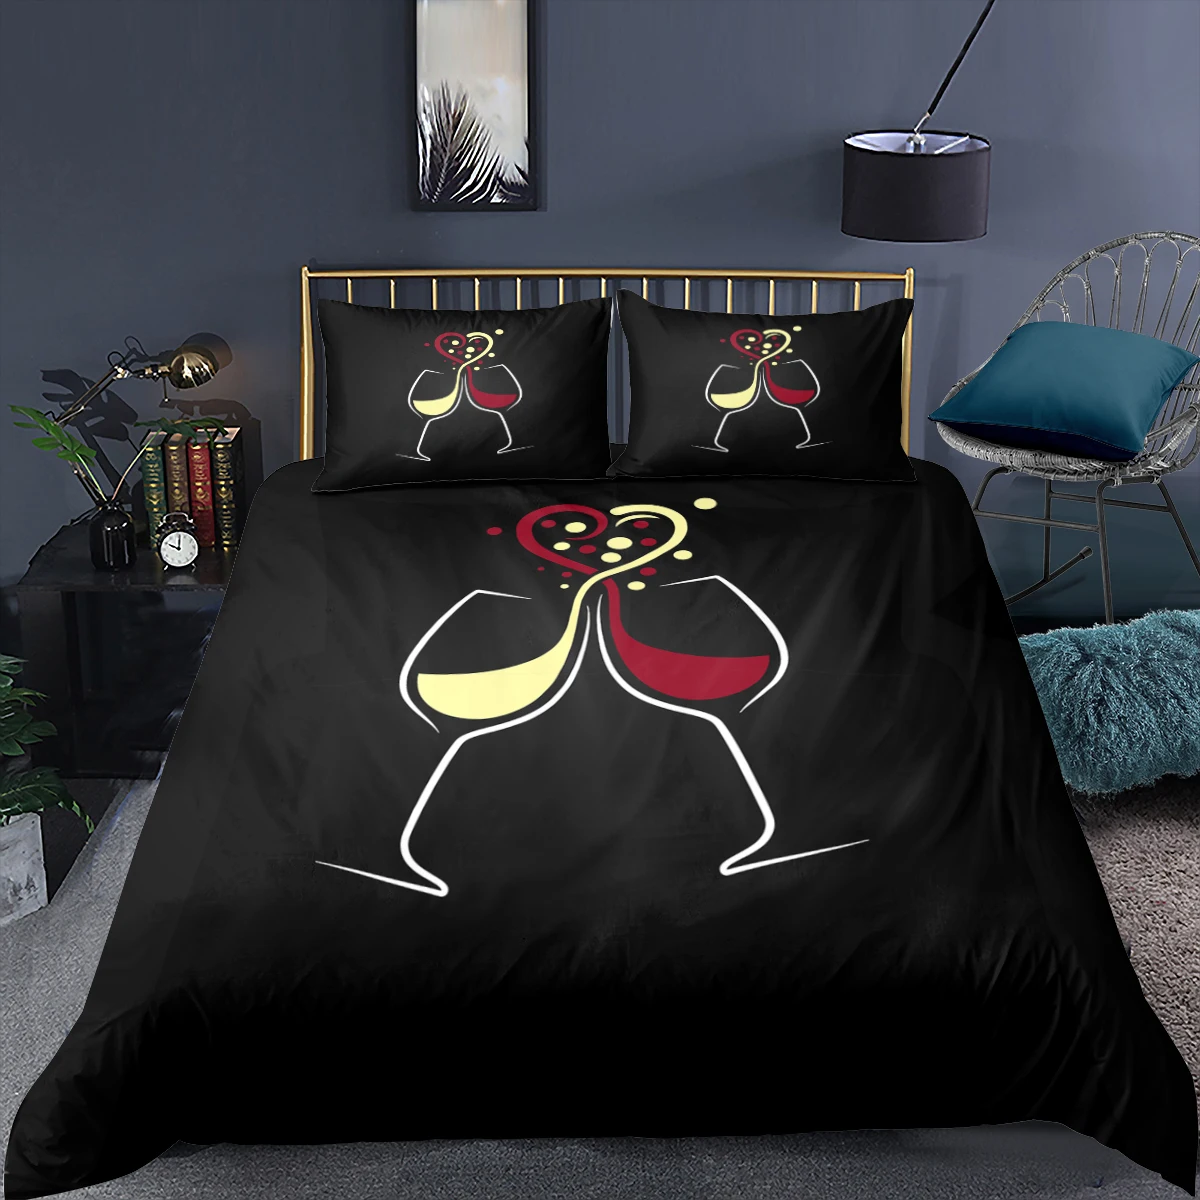 

Wine Glass Bedding Set Love Duvet Cover Set Luxury Adults Bedroom Bed Cover Pillowcase 2/3 Piece Black Luxury Comforter Cover